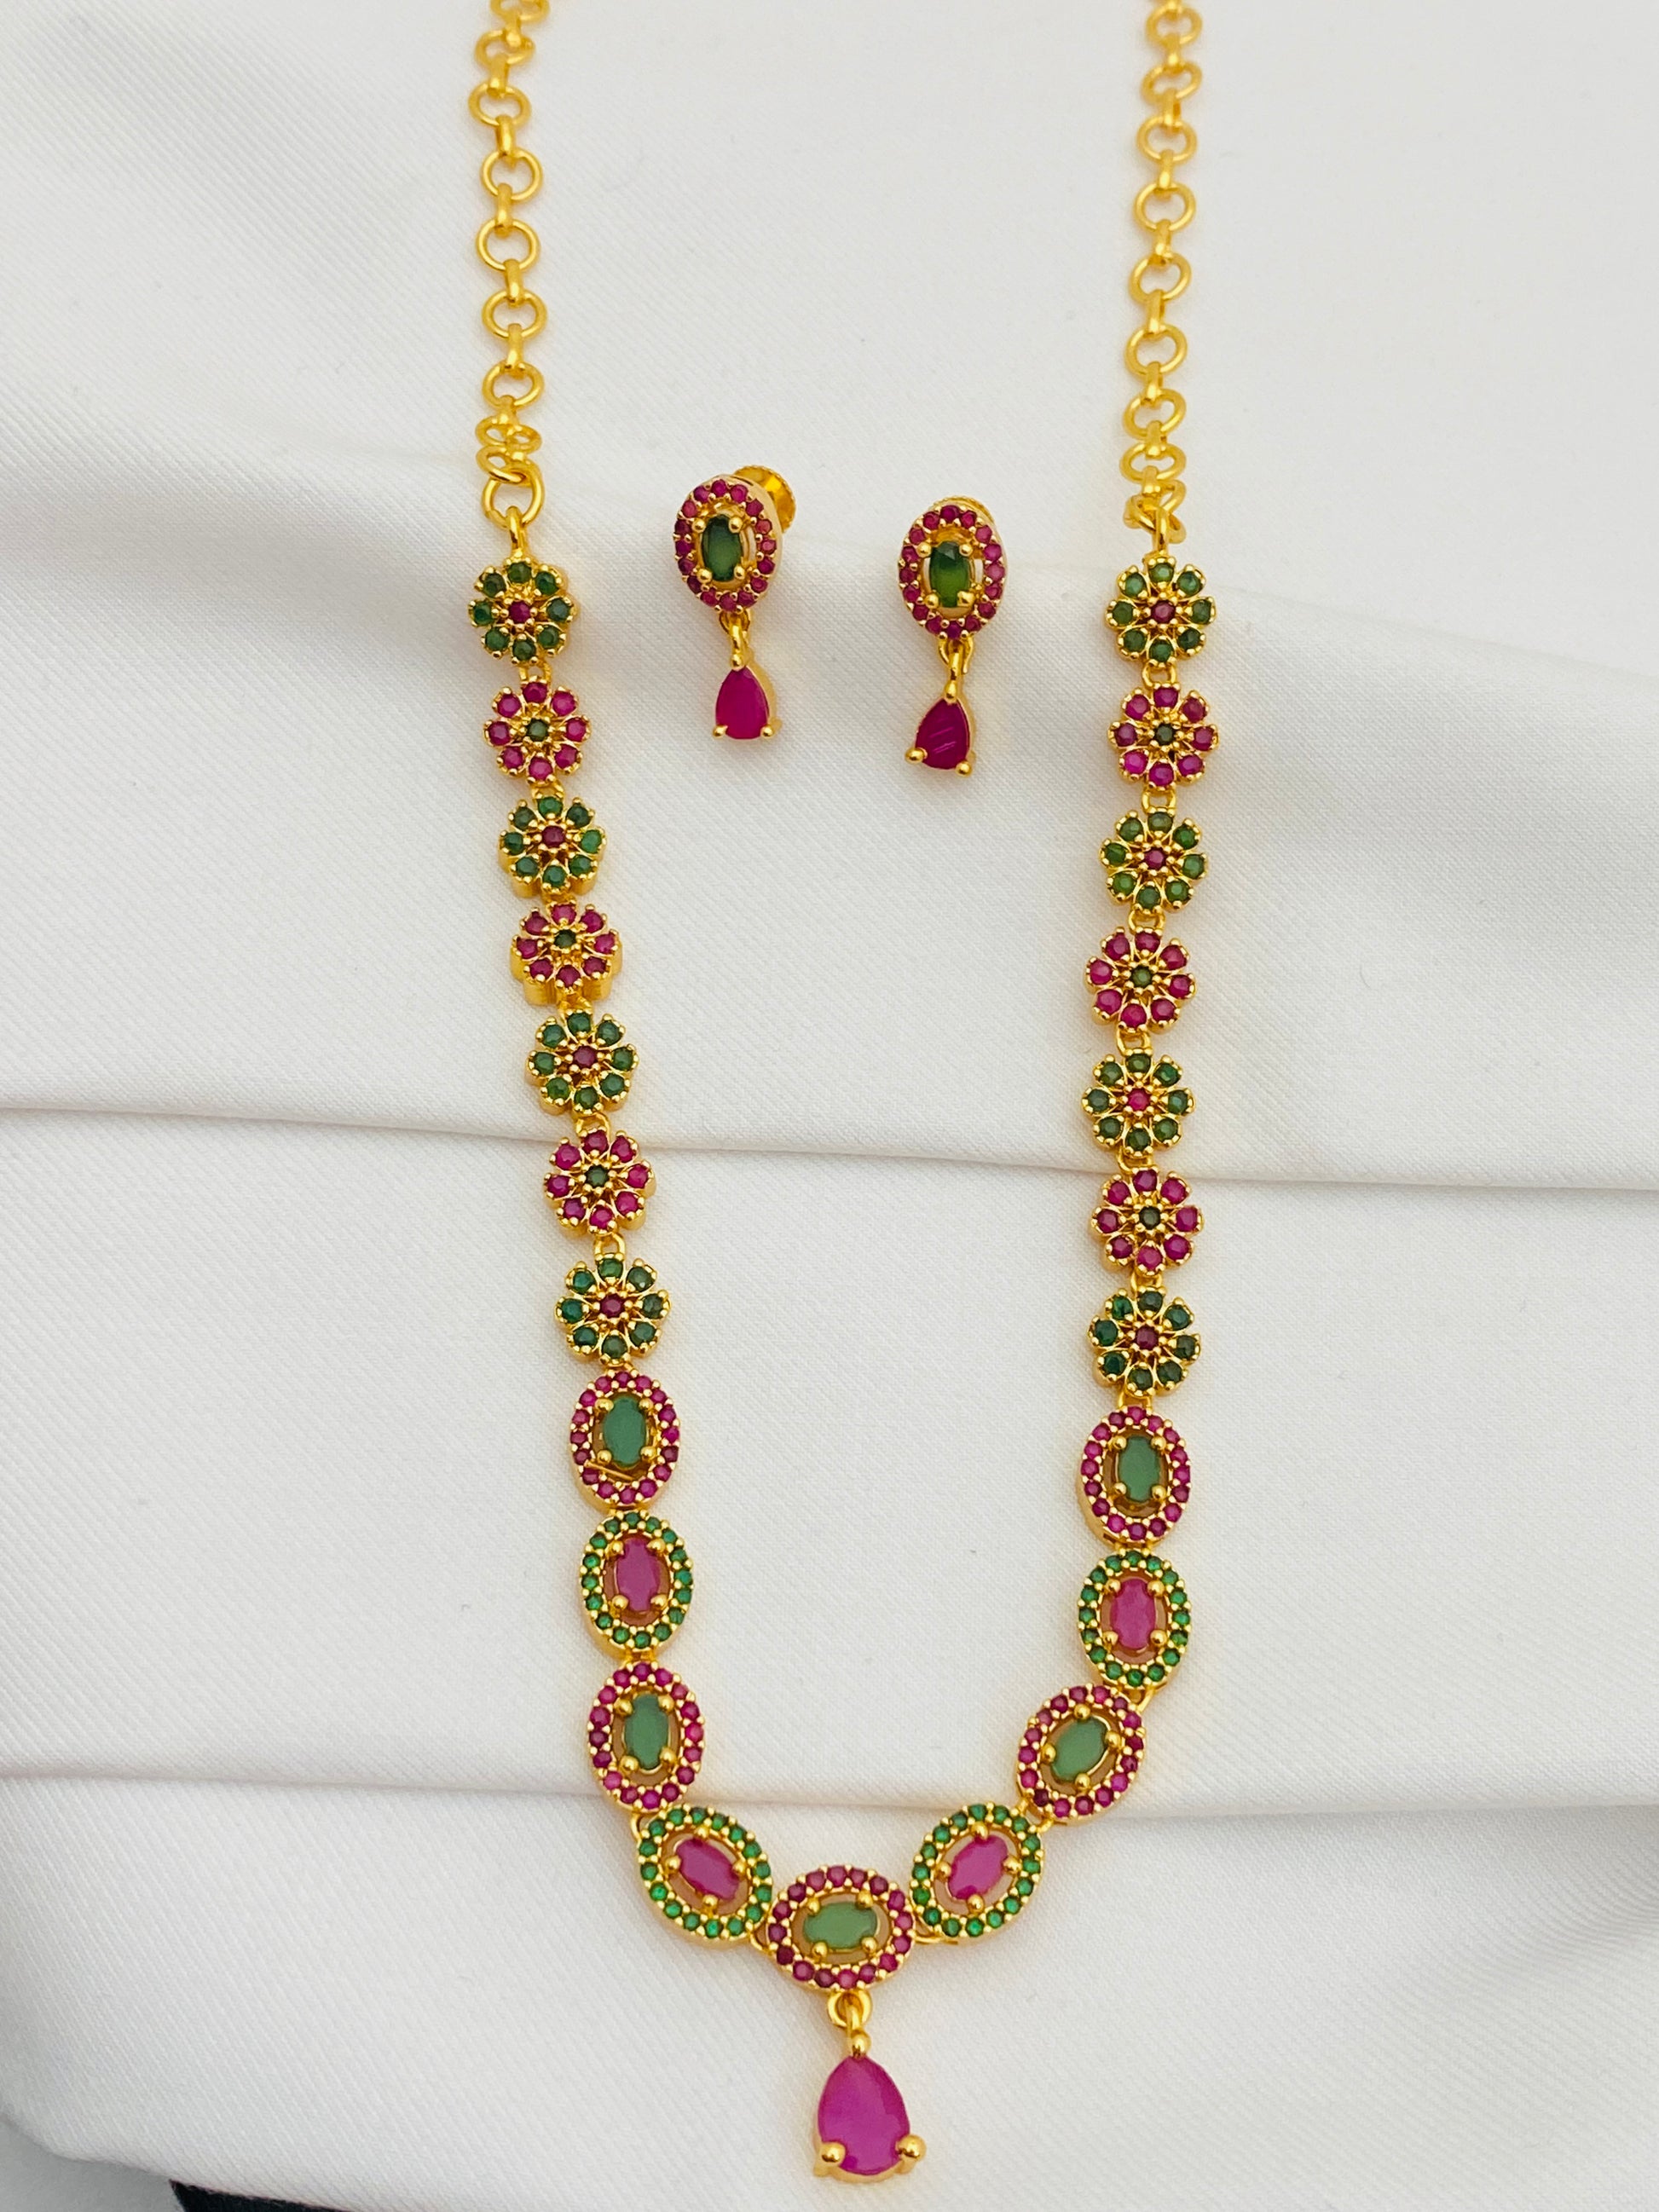 Bridal Wear Necklace With Earrings In Chandler